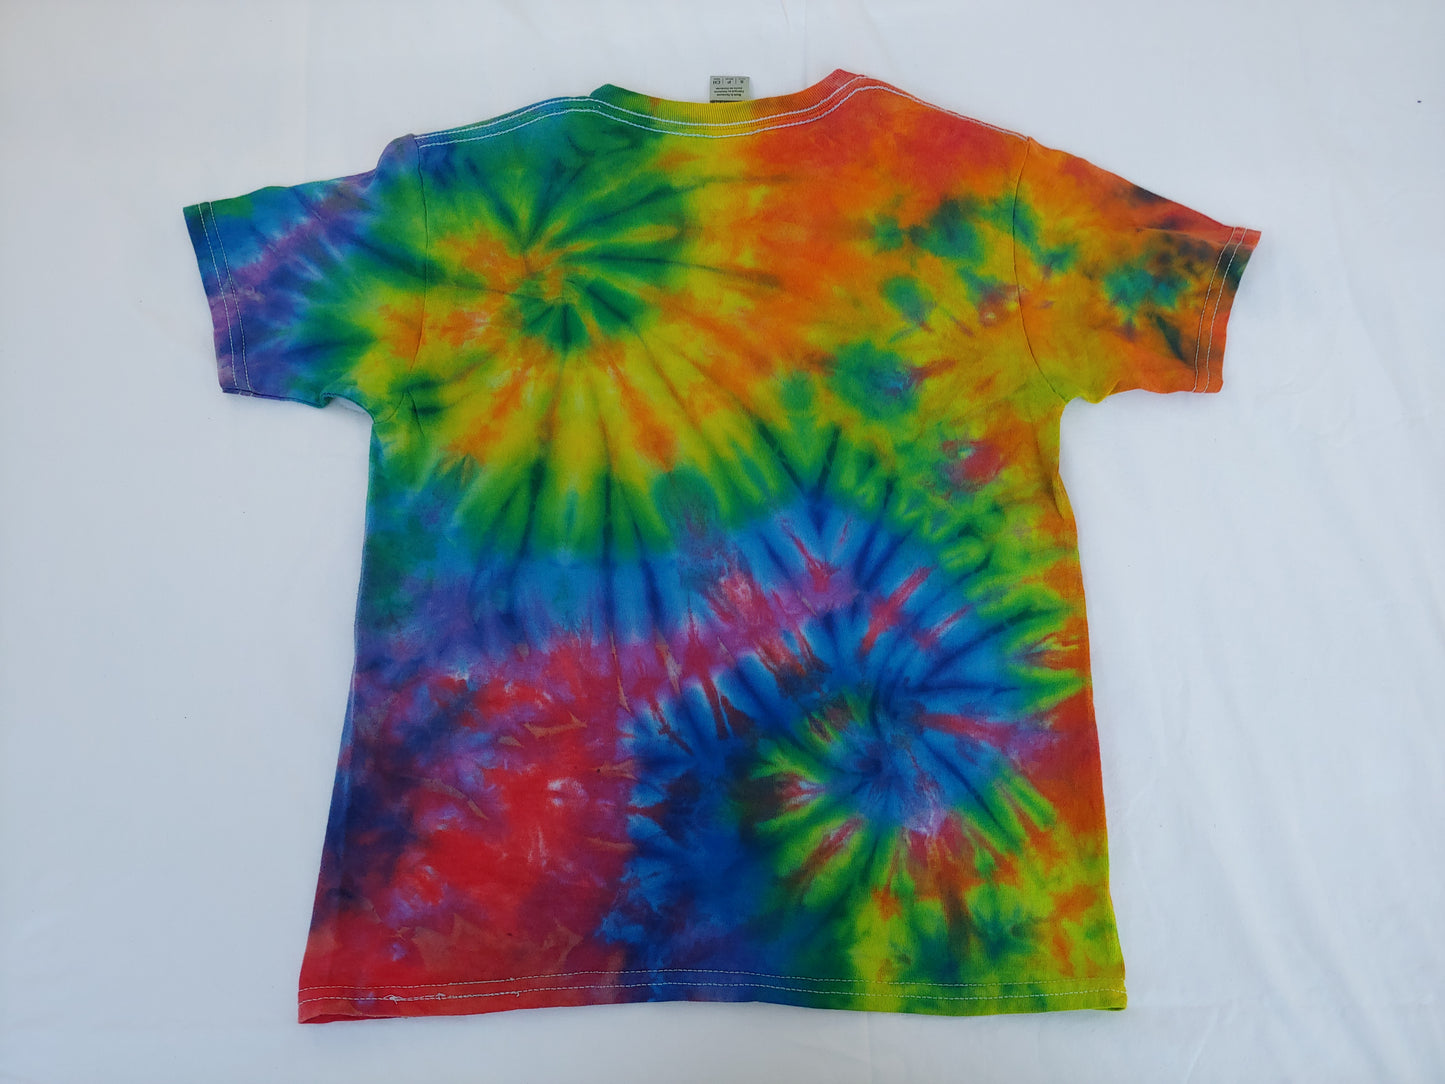 YOUTH SMALL TIE DYE TEE 57